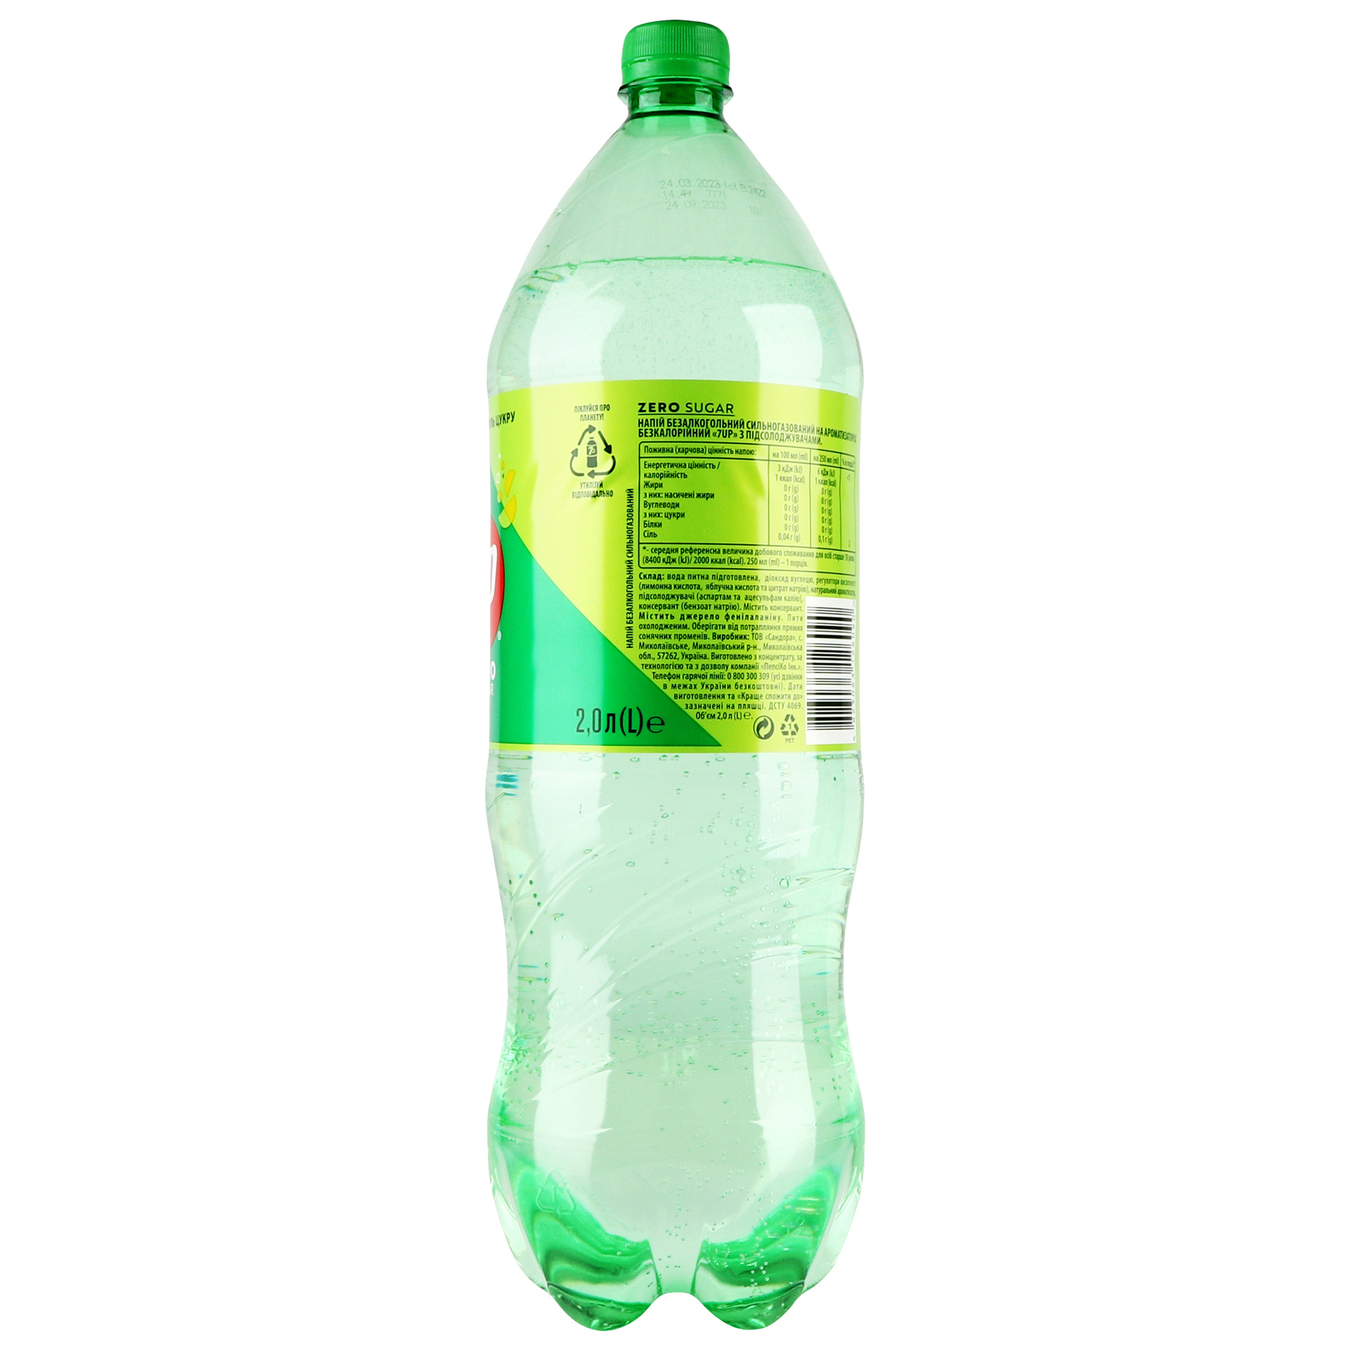  Carbonated drink 7 UP Free 2 l 4